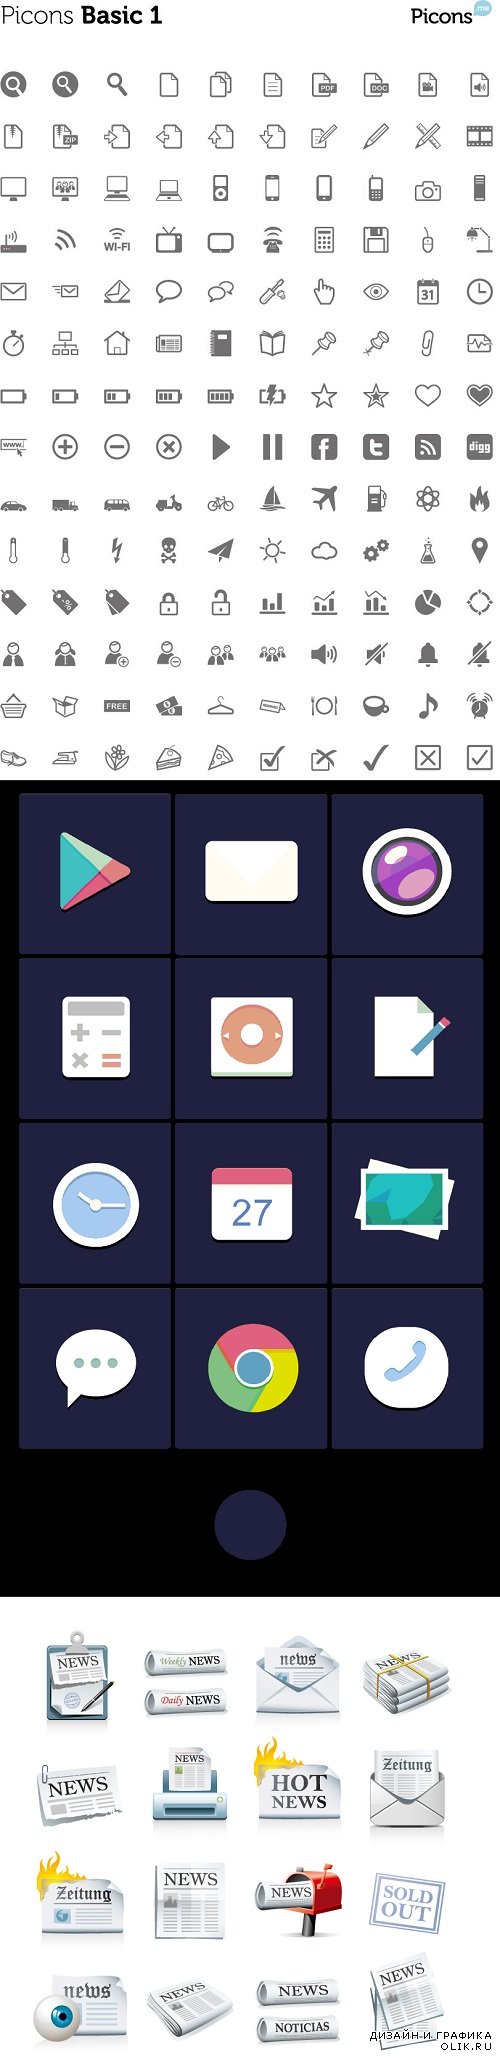 Vector - Icons windows shortcuts and news